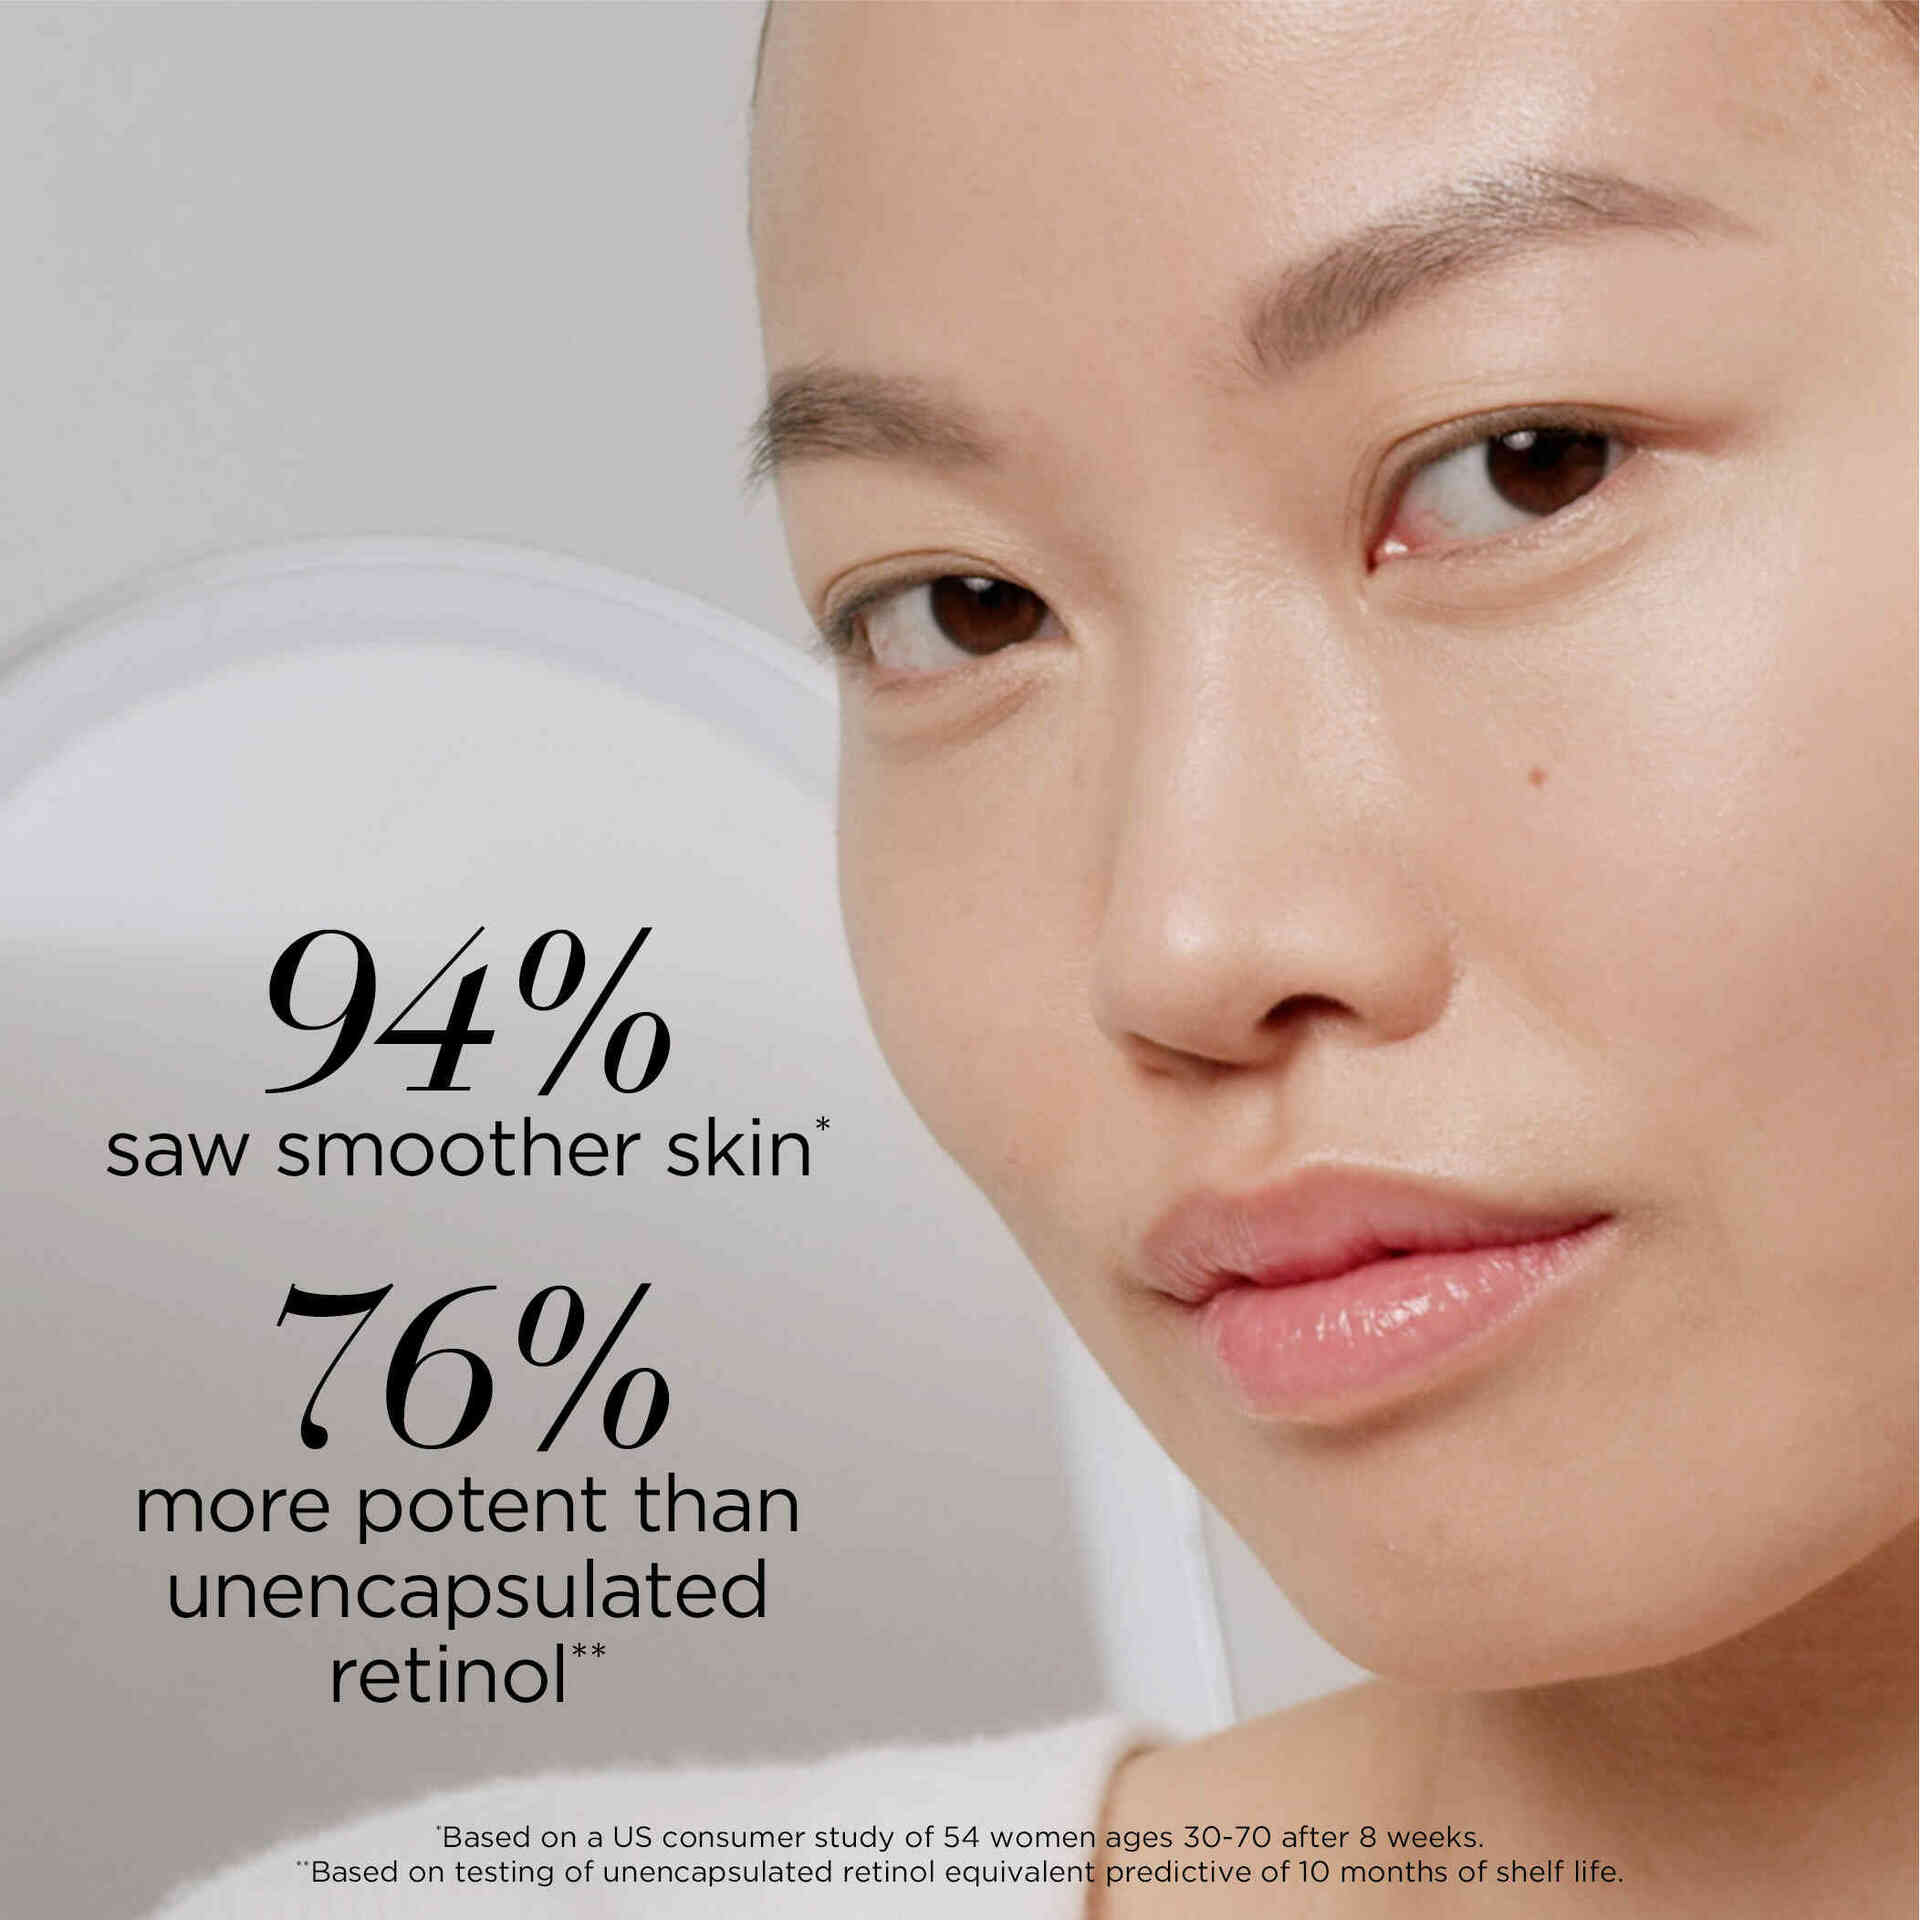 Retinol enhances skin’s natural collagen, thickens the deeper layer of skin to reduce the appearance of lines and wrinkles